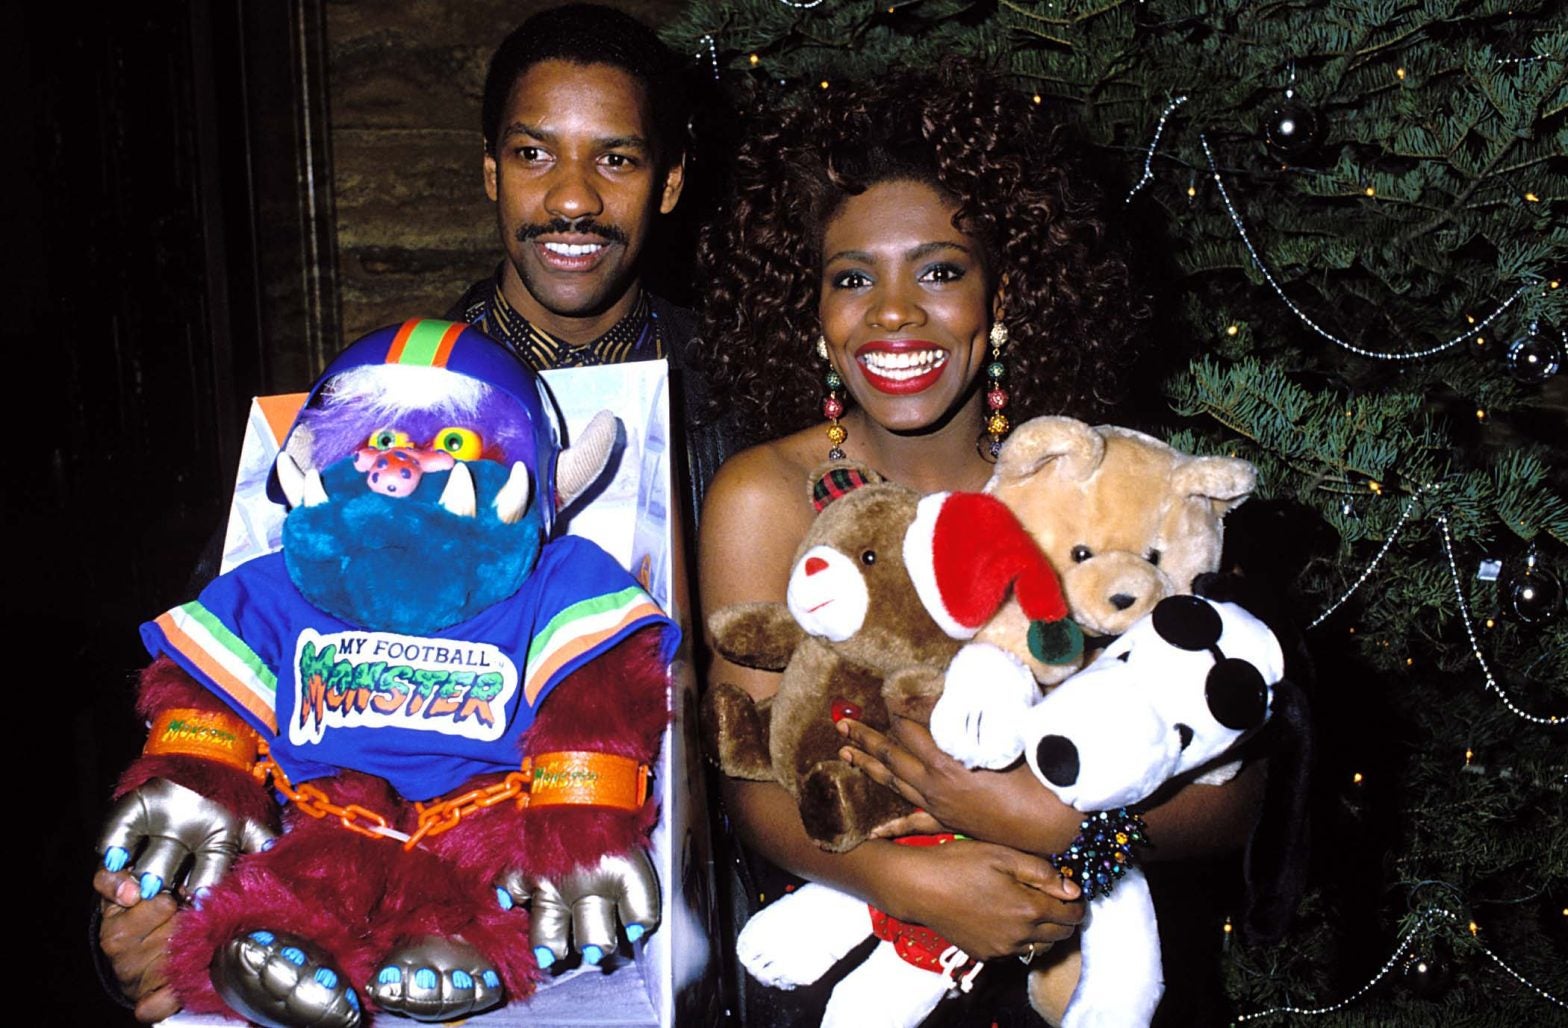 17 Moments Of Vintage Black Joy You Didn't Know You Didn't Know You Needed To See